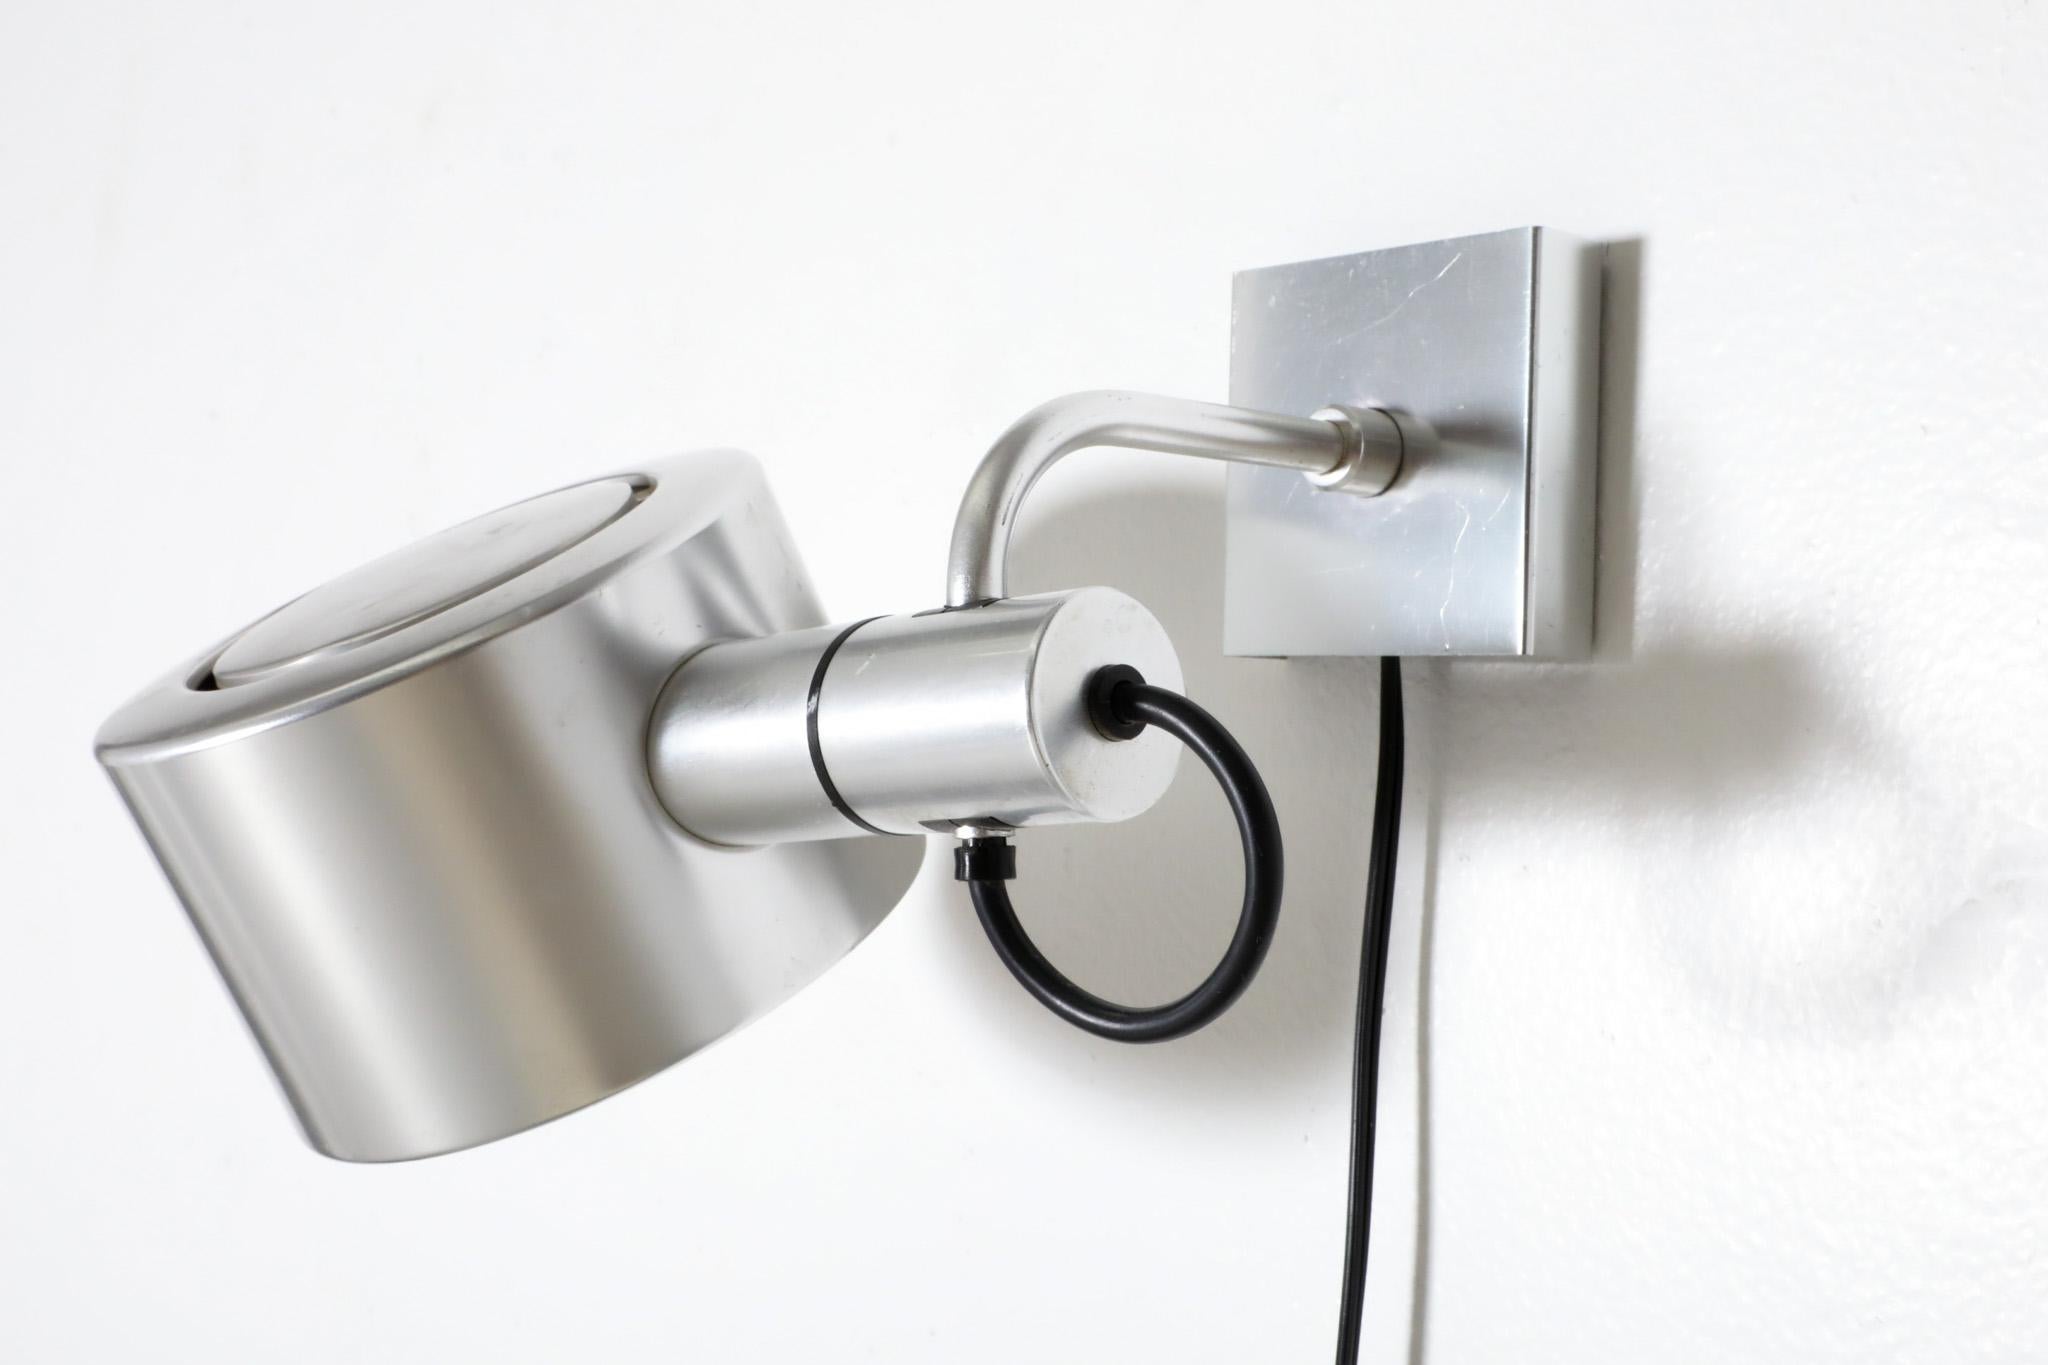 Metal Aluminum Can Spot Wall Lamp by Ronald Holmes & Peter Nelson, 1970's For Sale